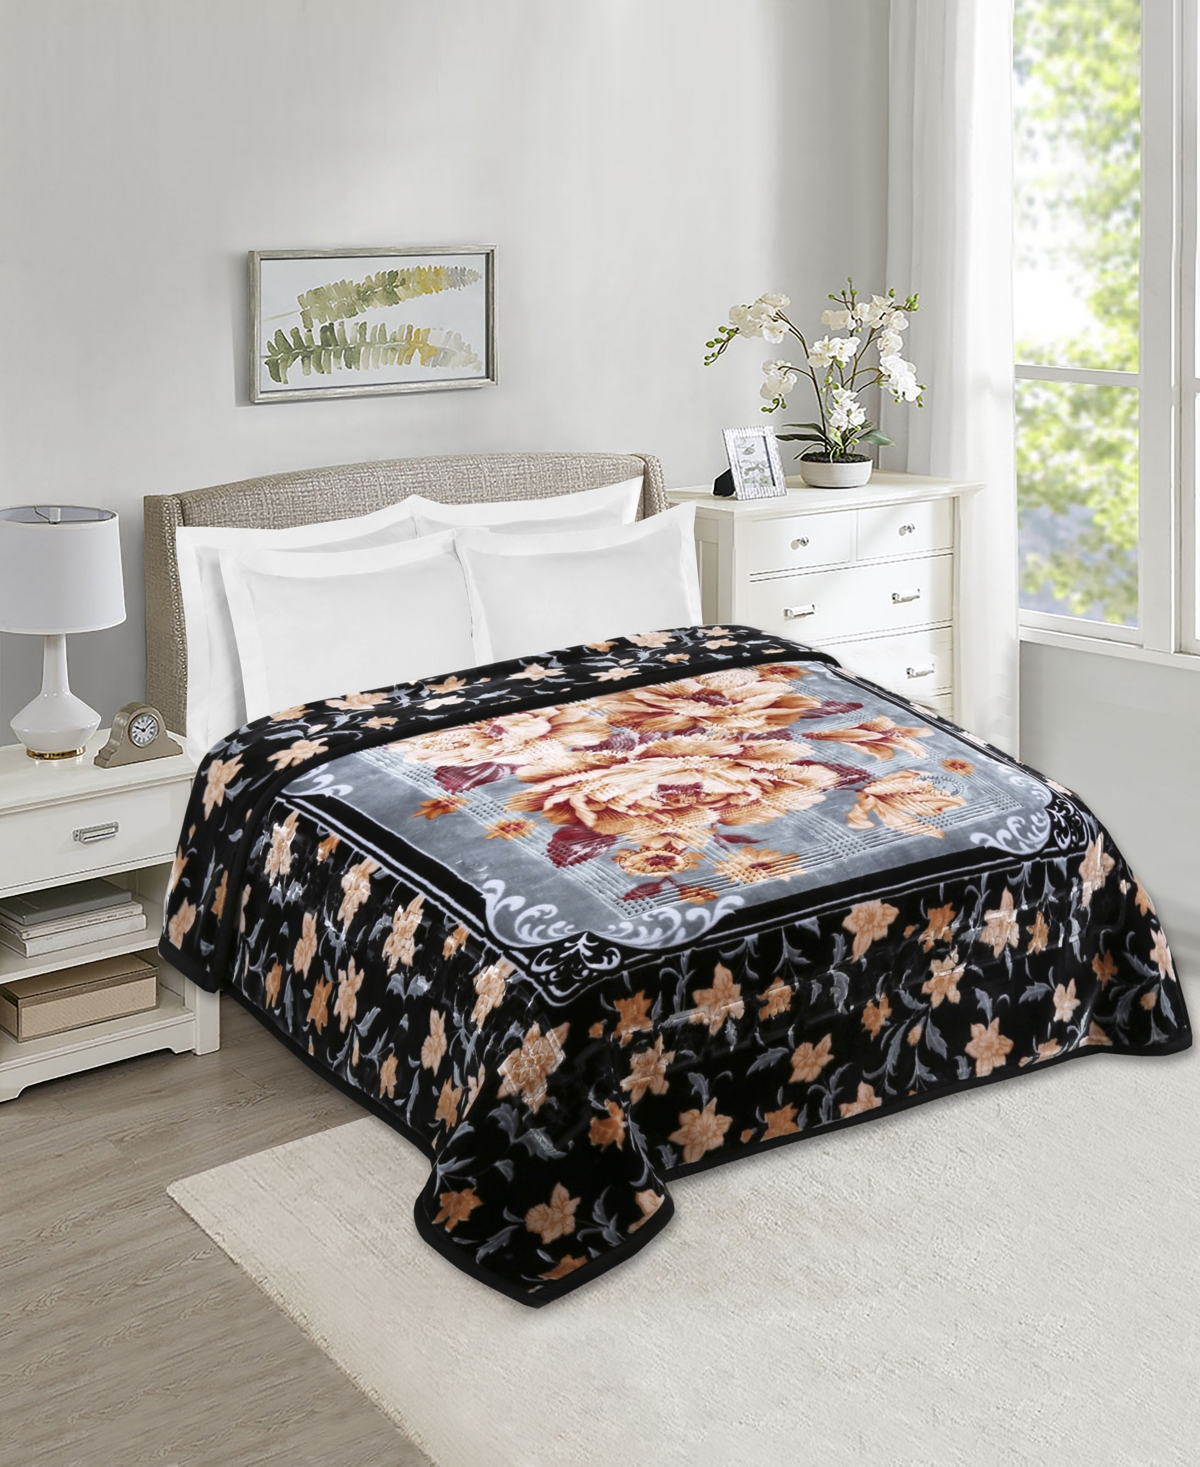 Nestl Printed Faux Mink Weighted Blanket, 9 Lbs, Queen In Black,gray,orange Floral